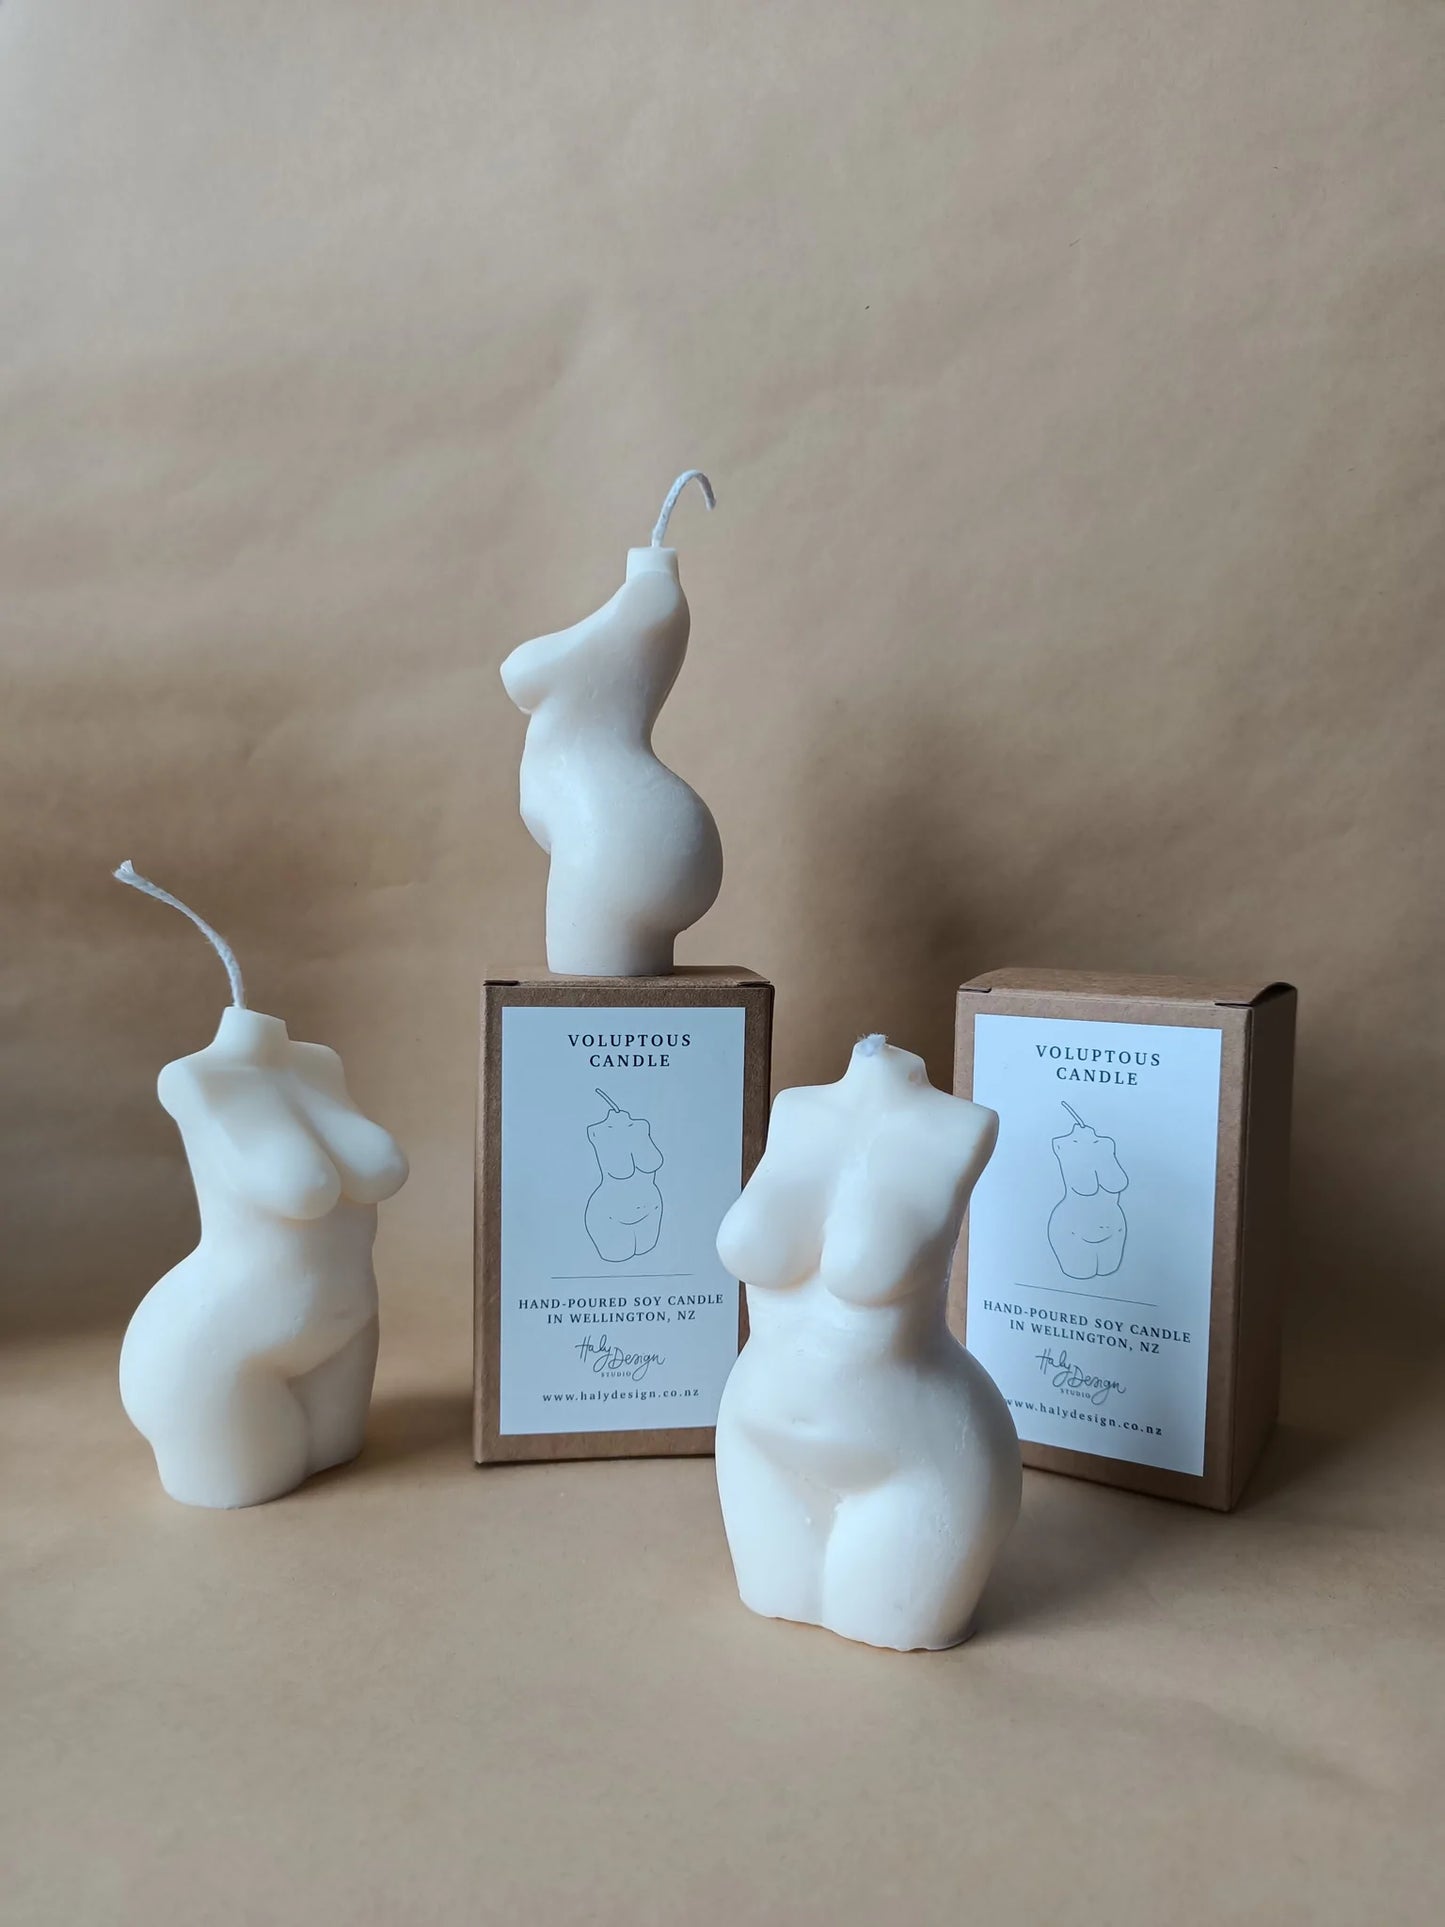 Hand Crafted Soy Candles | Voluptuous Lady Candle - Yoho Baby & co.